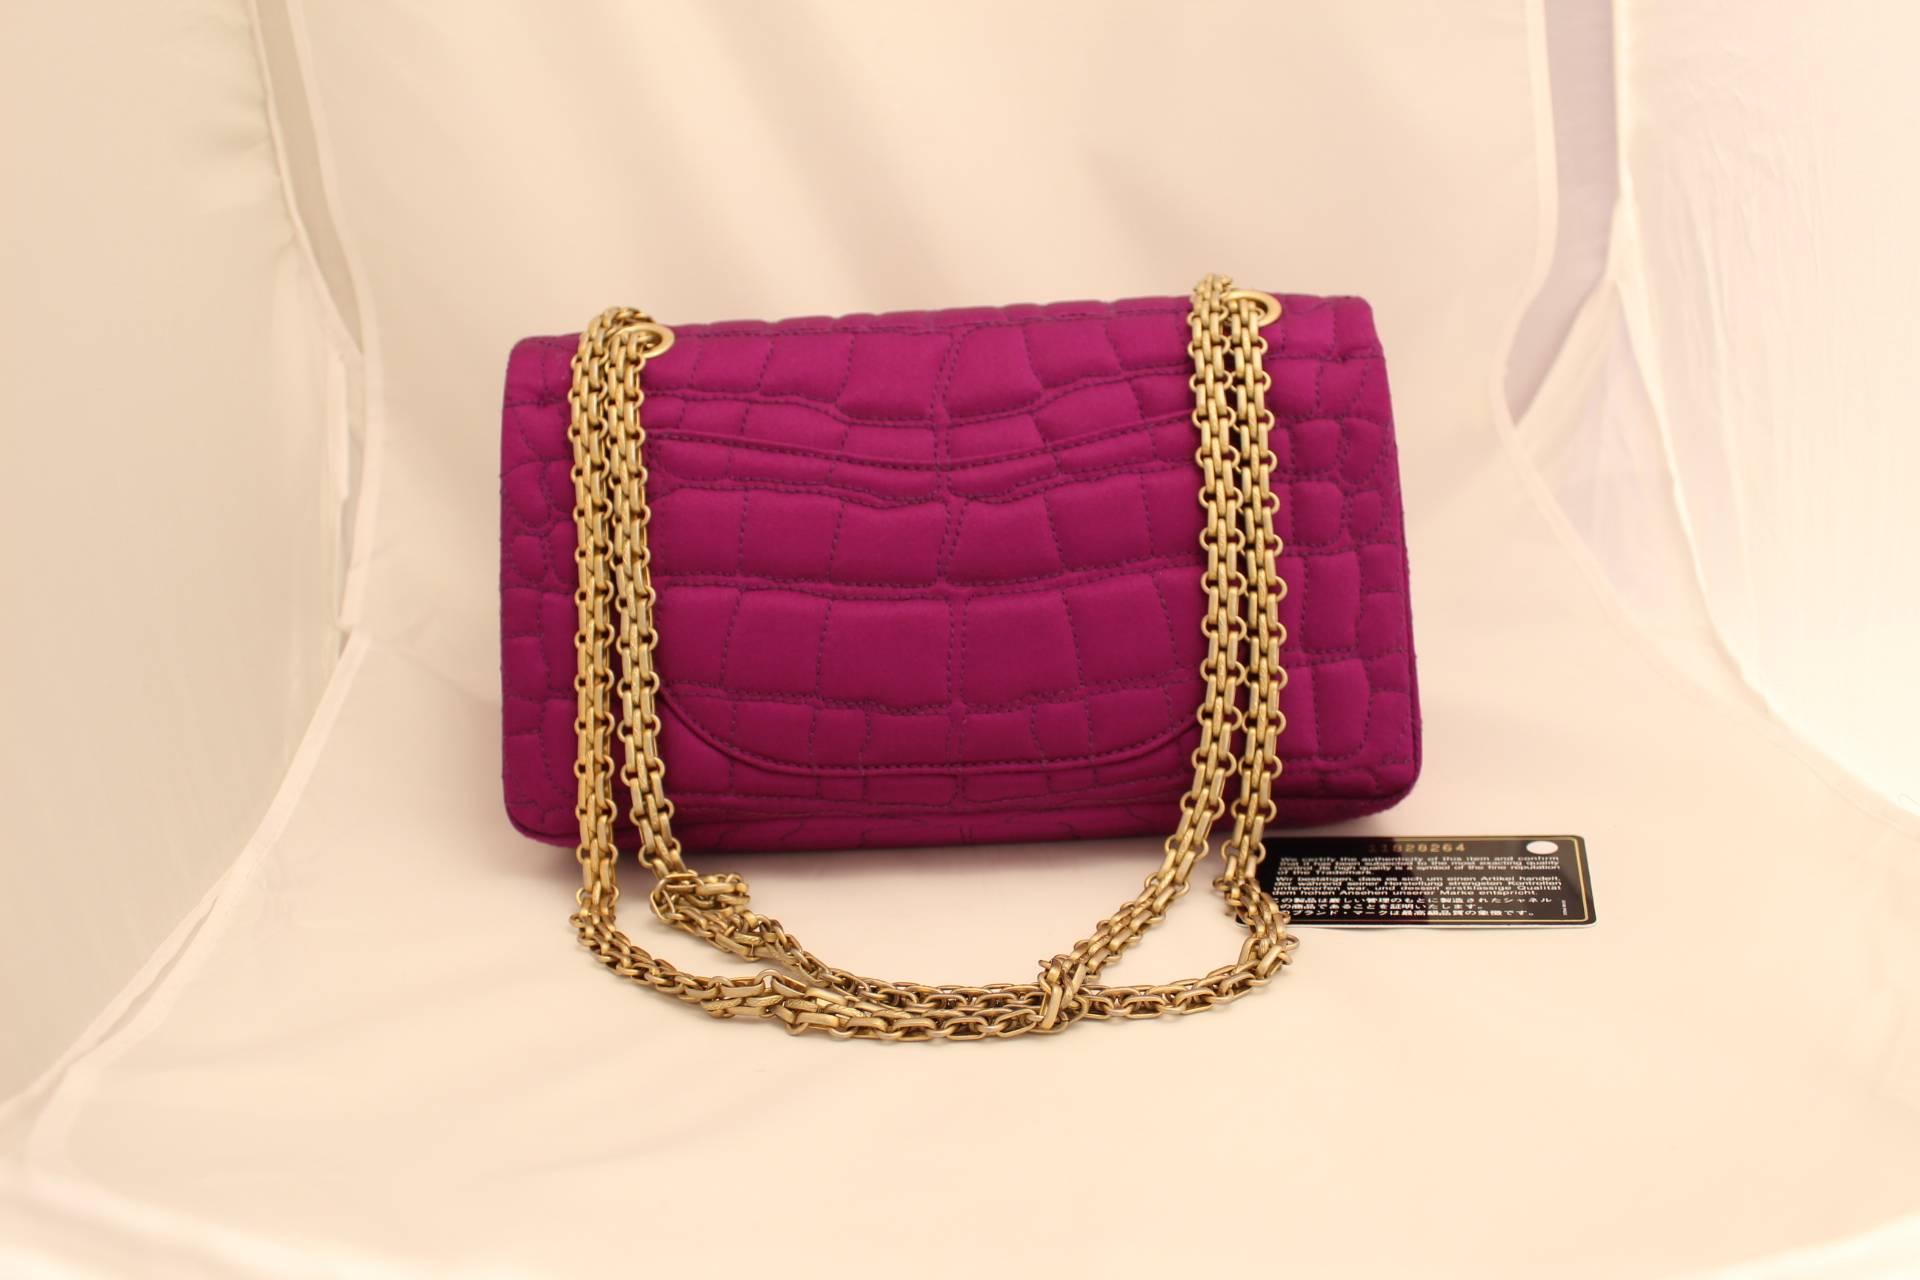 Red Chanel 2.55 Double Flap bag with golden hardware